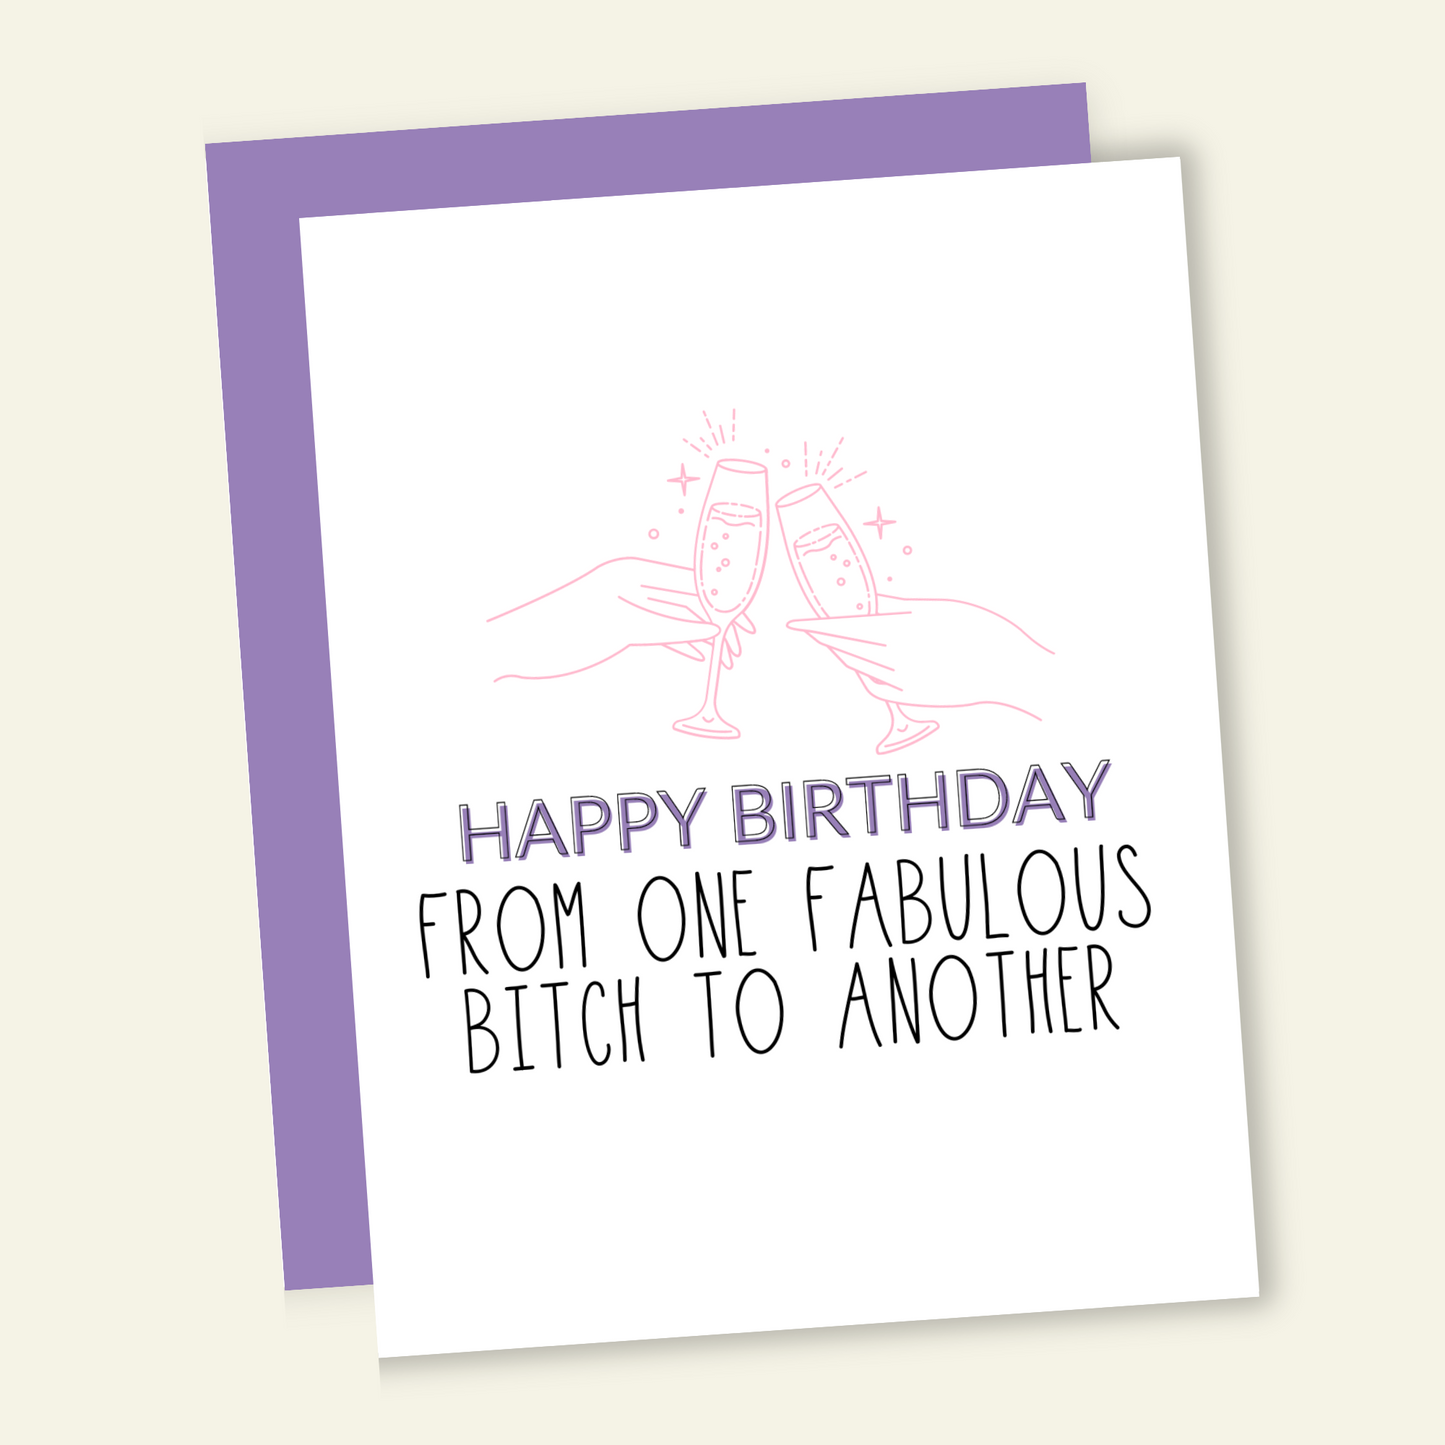 Happy Birthday From One Fabulous B*tch to Another